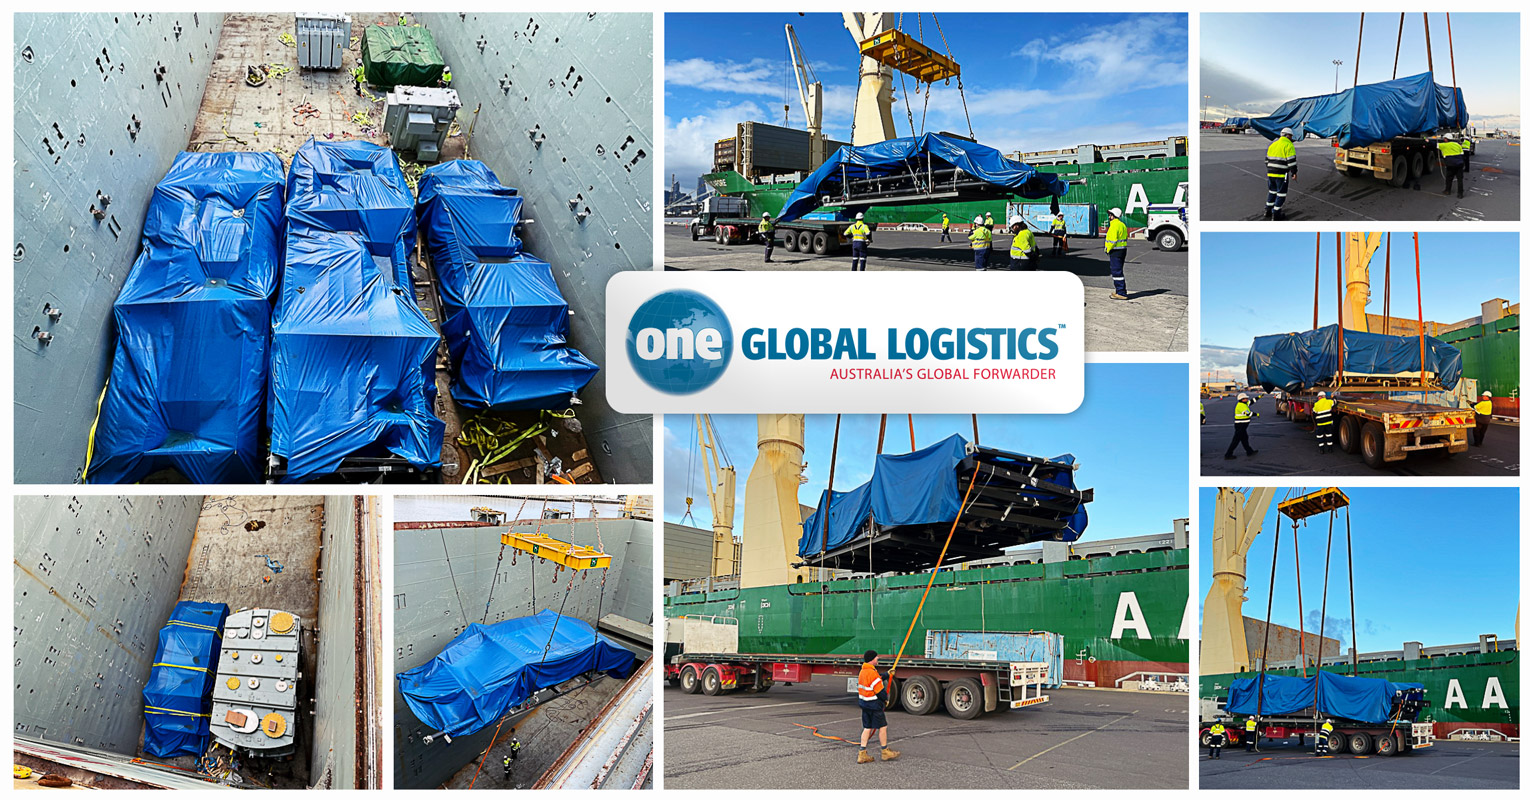 One Global Logistics Managed the Ocean Freight & Landside Logistics of 4 Packages from Shanghai to Melbourne